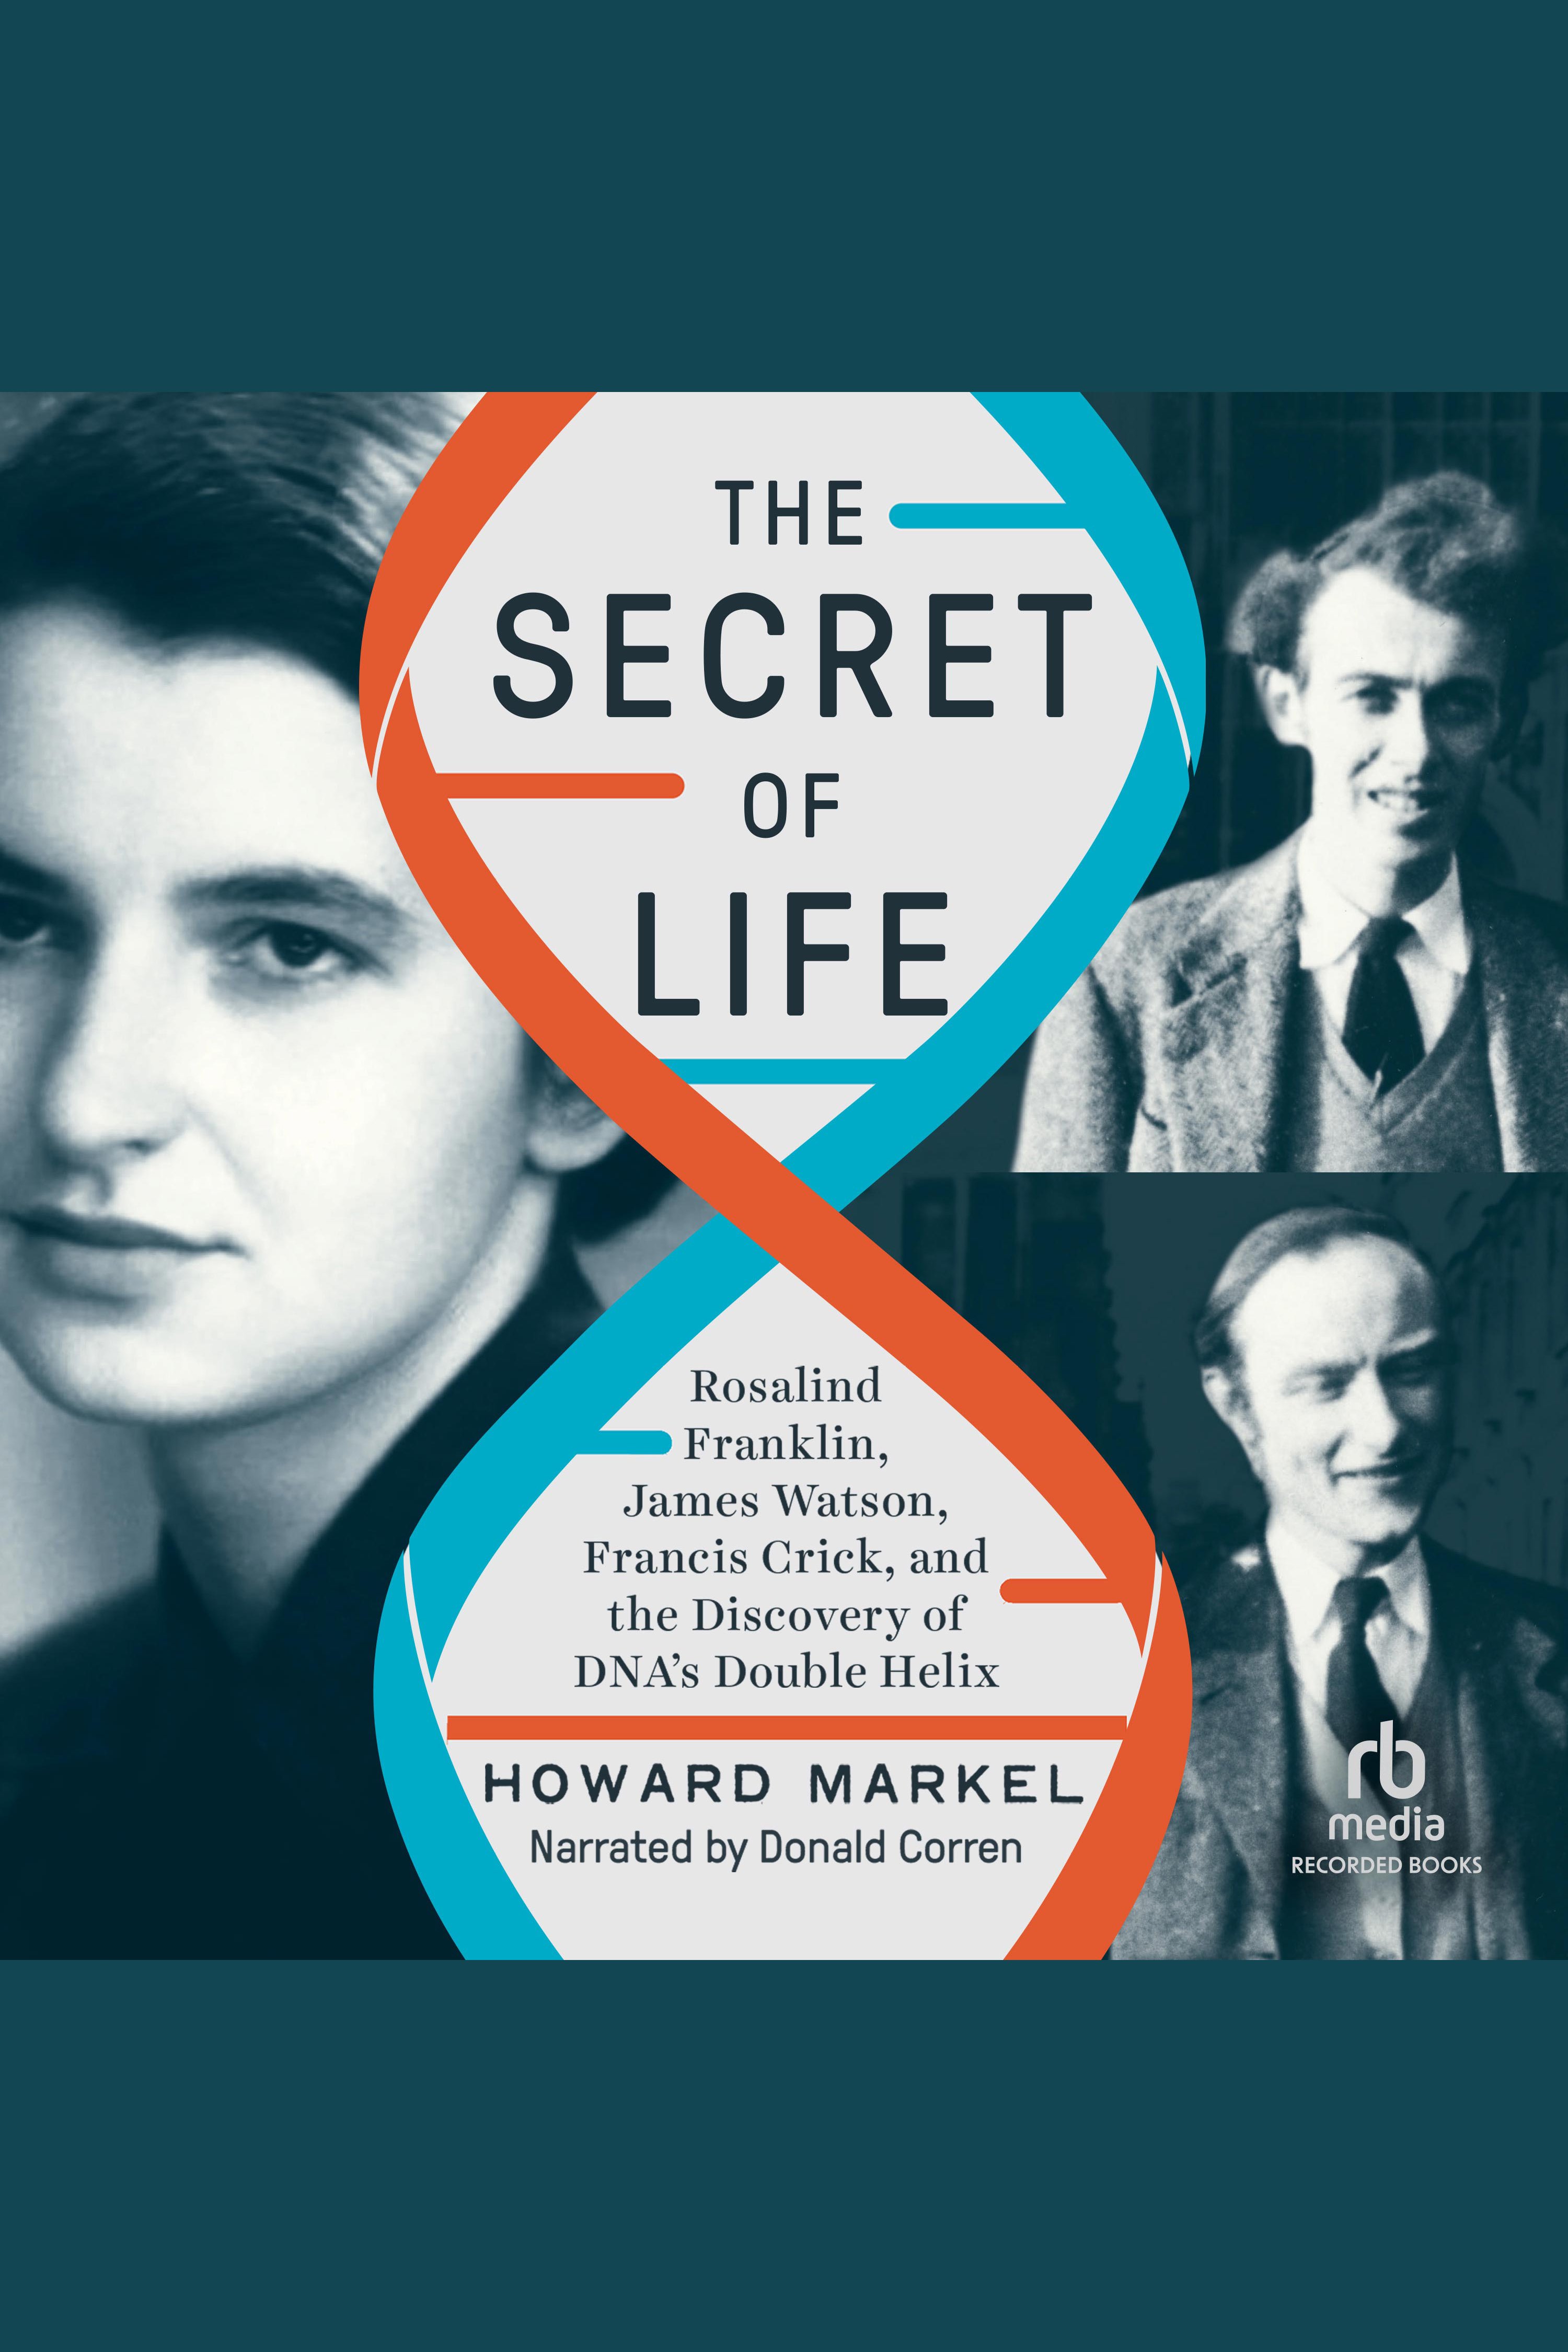 The Secret of Life Rosalind Franklin, James Watson, Francis Crick, and the Discovery of DNA's Double Helix cover image